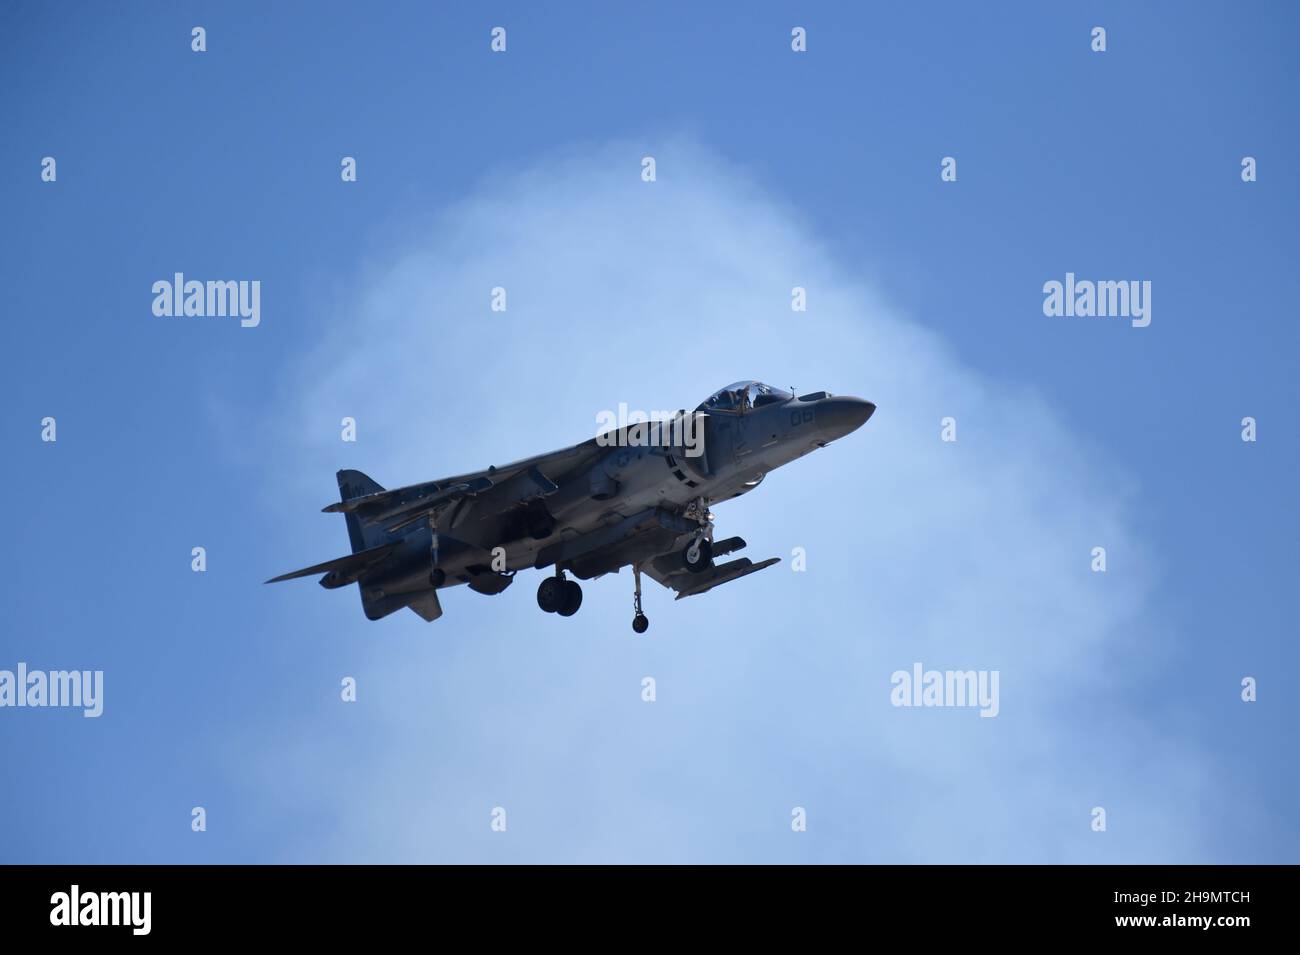 United States Marine Corps AV-8B Harrier hovers during a flight demonstration at MCAS Miramar, in San Diego, California Stock Photo